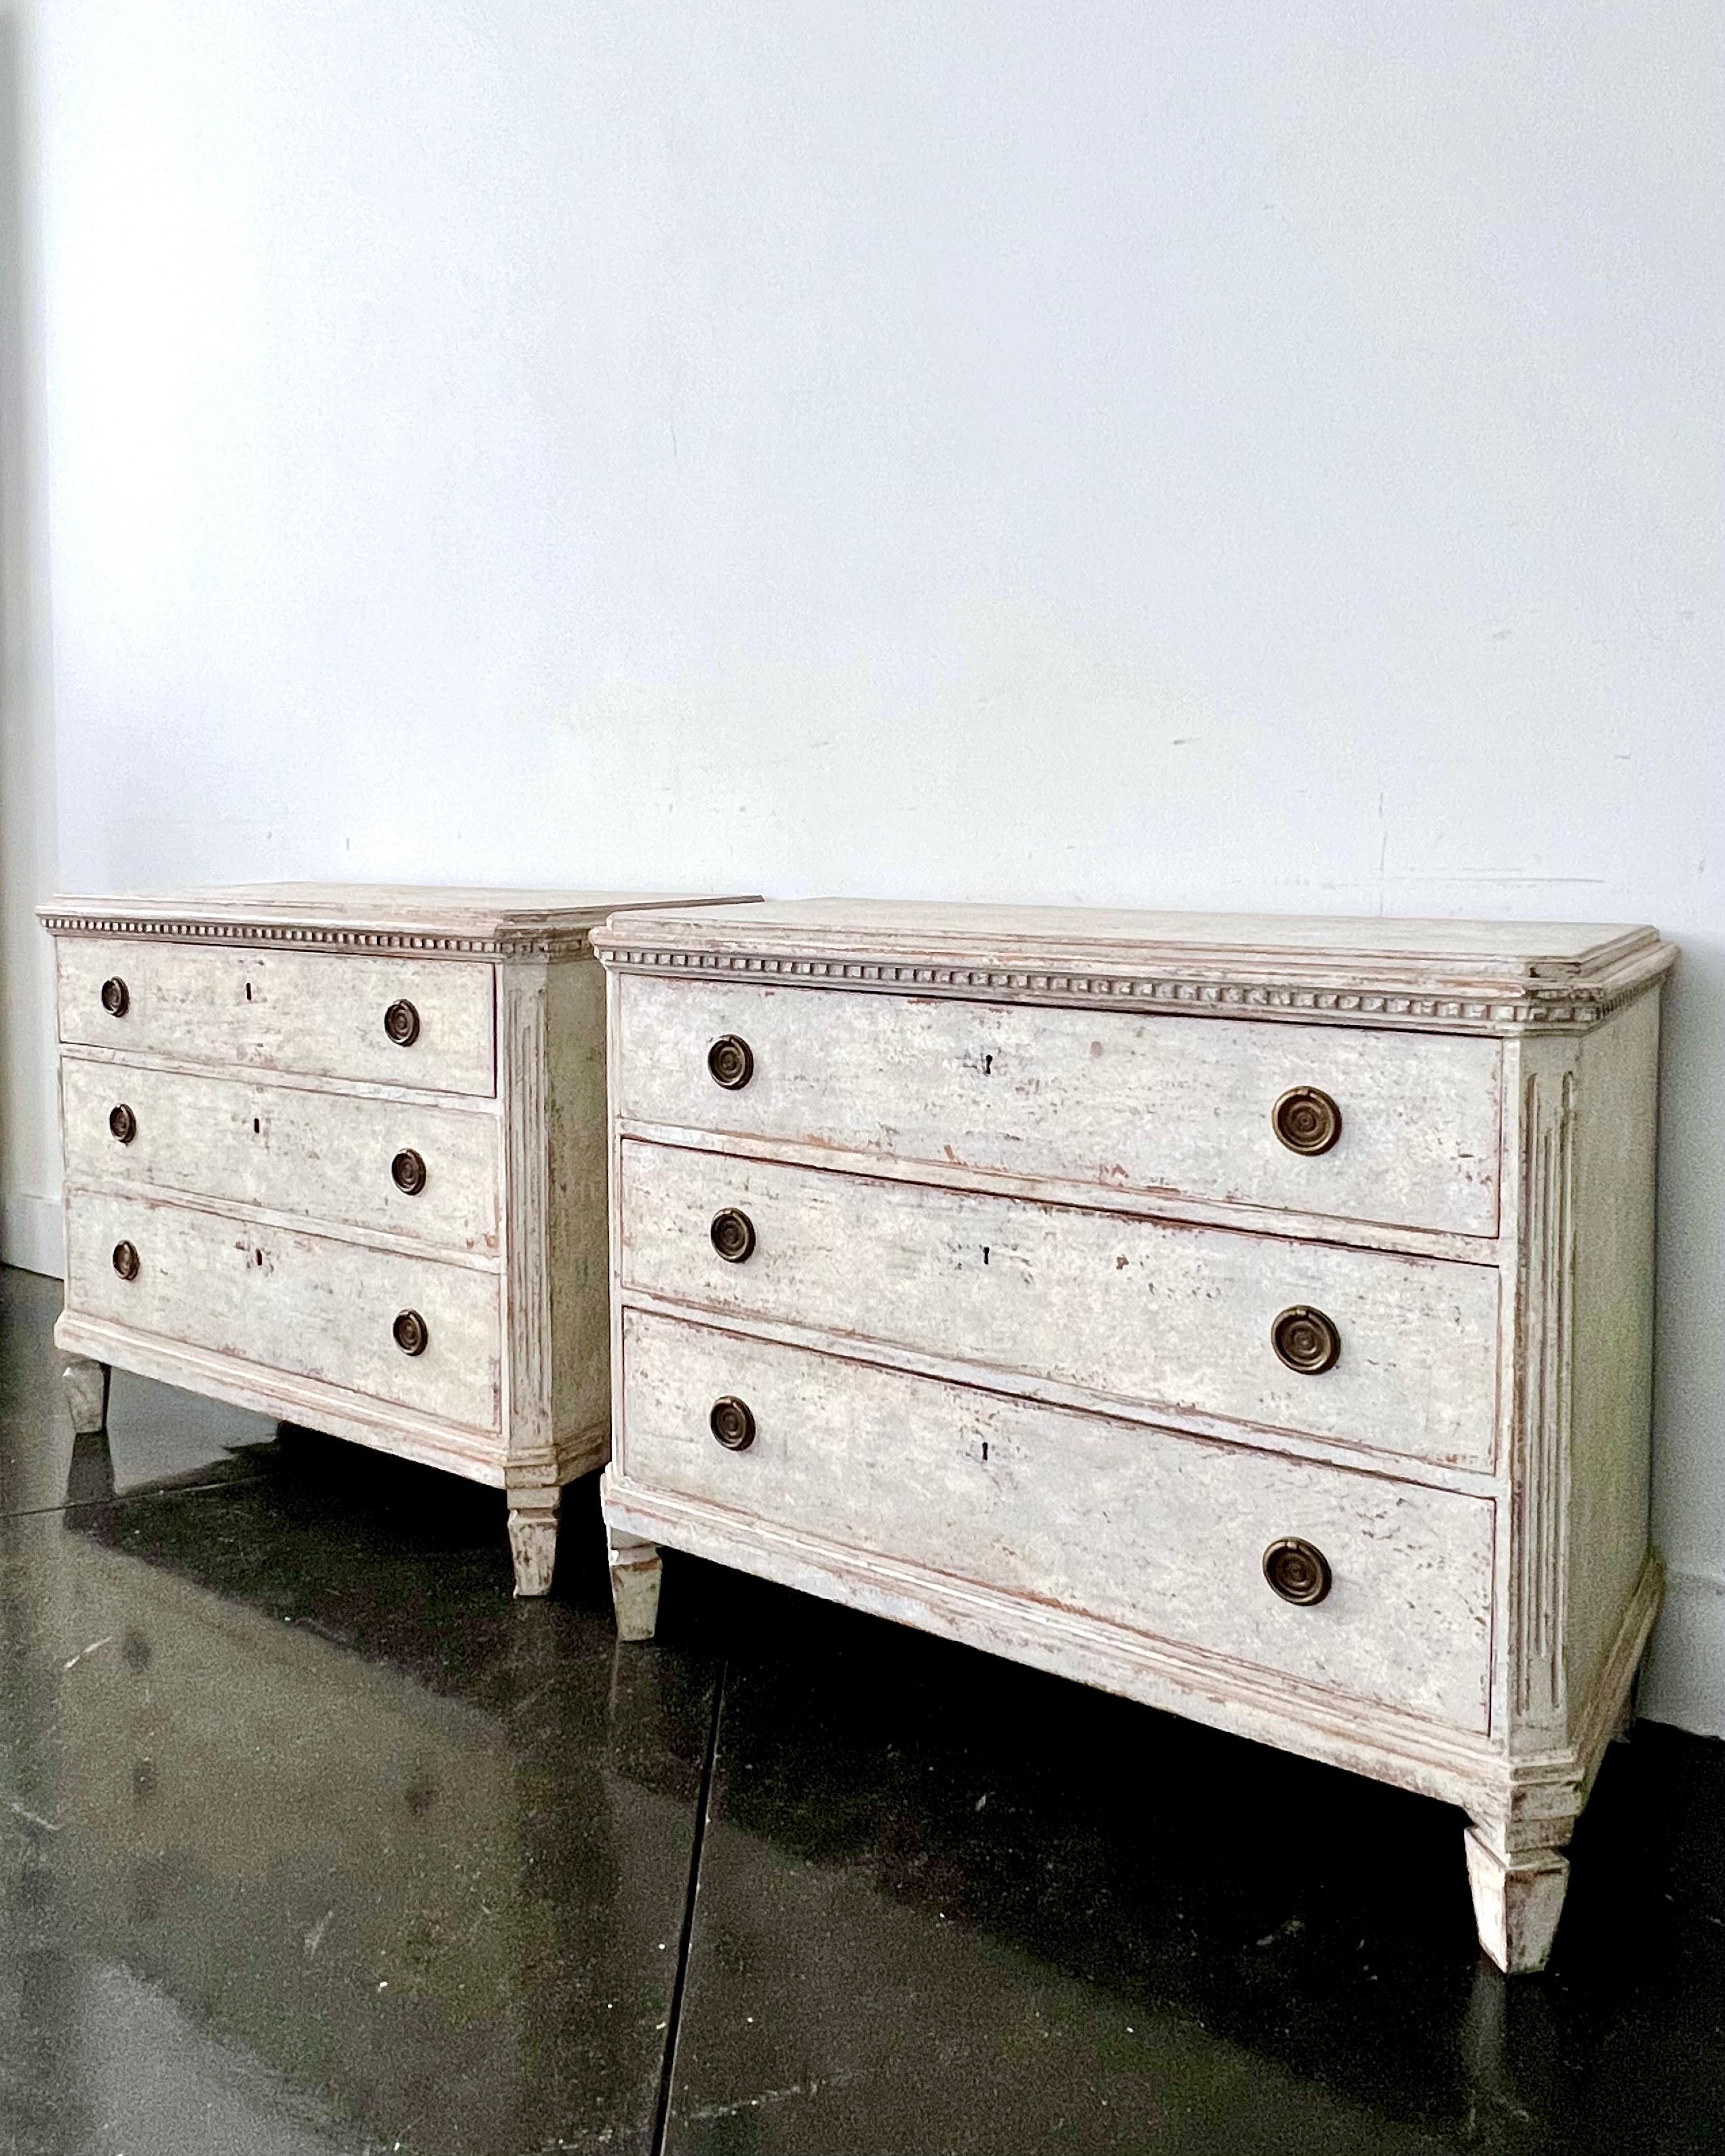 A pair of mid 19th century Swedish Gustavian style chest of drawers with brass fittings, dental trims under the shaped wooden tops, canted and fluted corners posts in light white/ grayish finish, resting on short, square tapering feet.
Sweden, circa